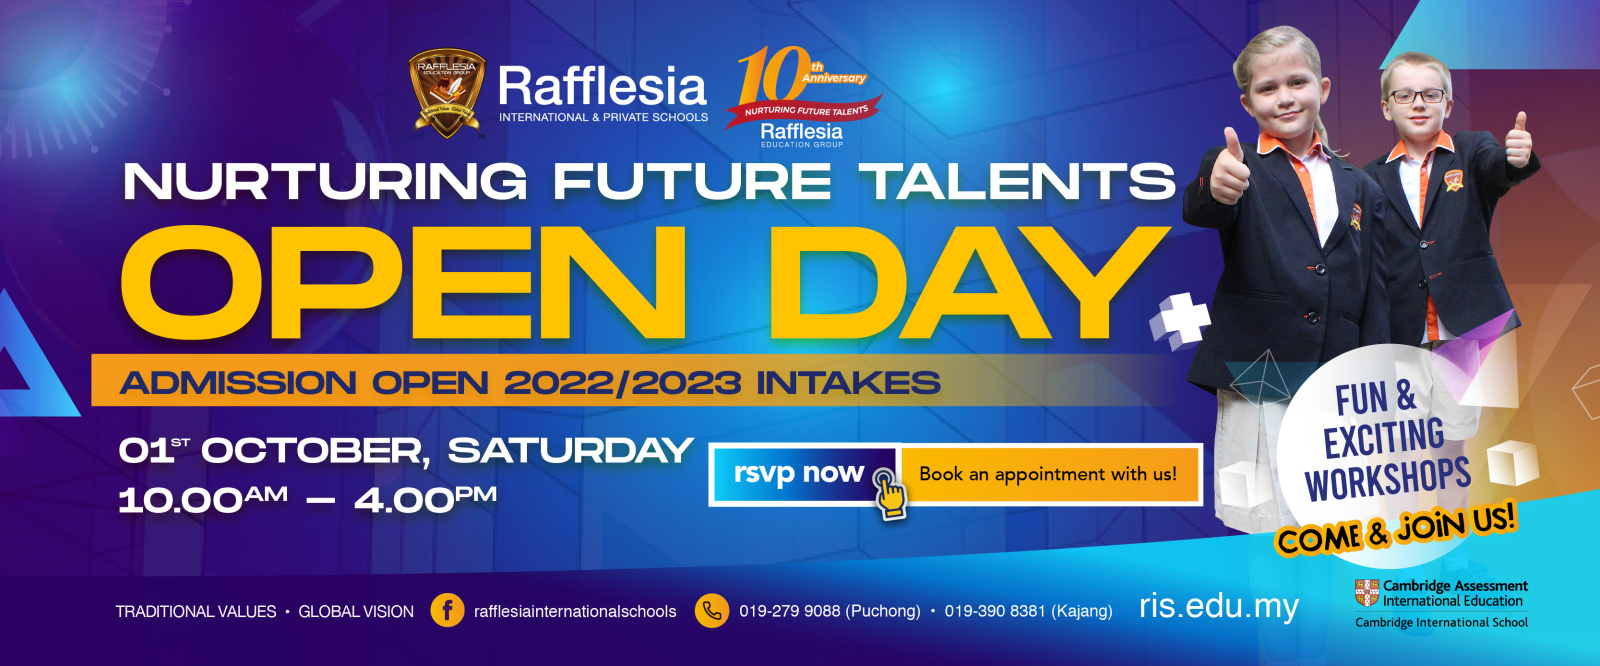 Open Day 01 October 2022